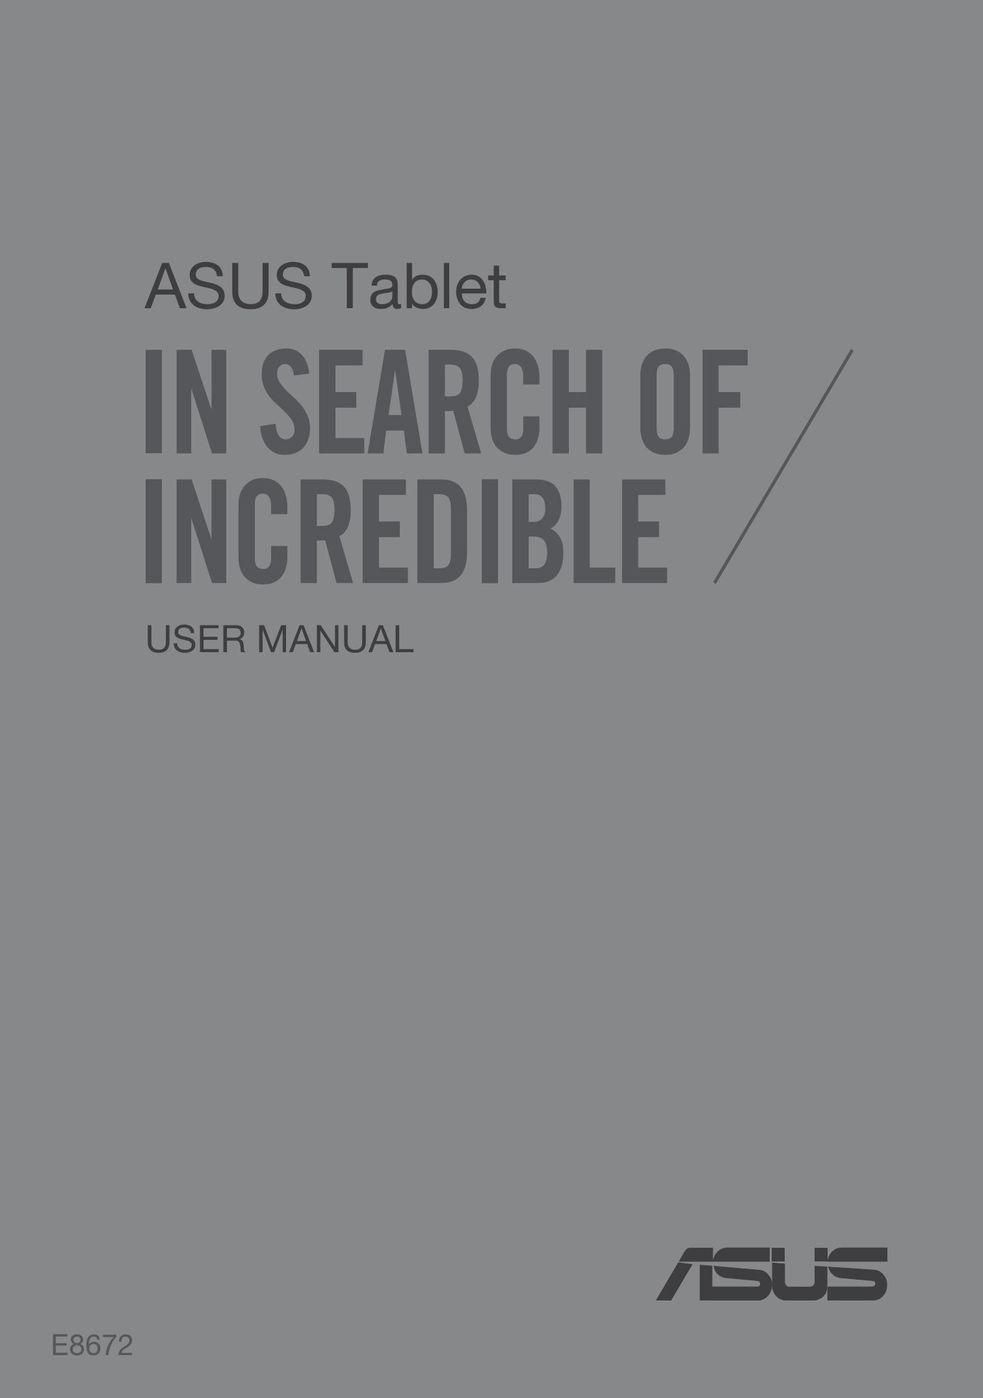 Asus E8672 Graphics Tablet User Manual